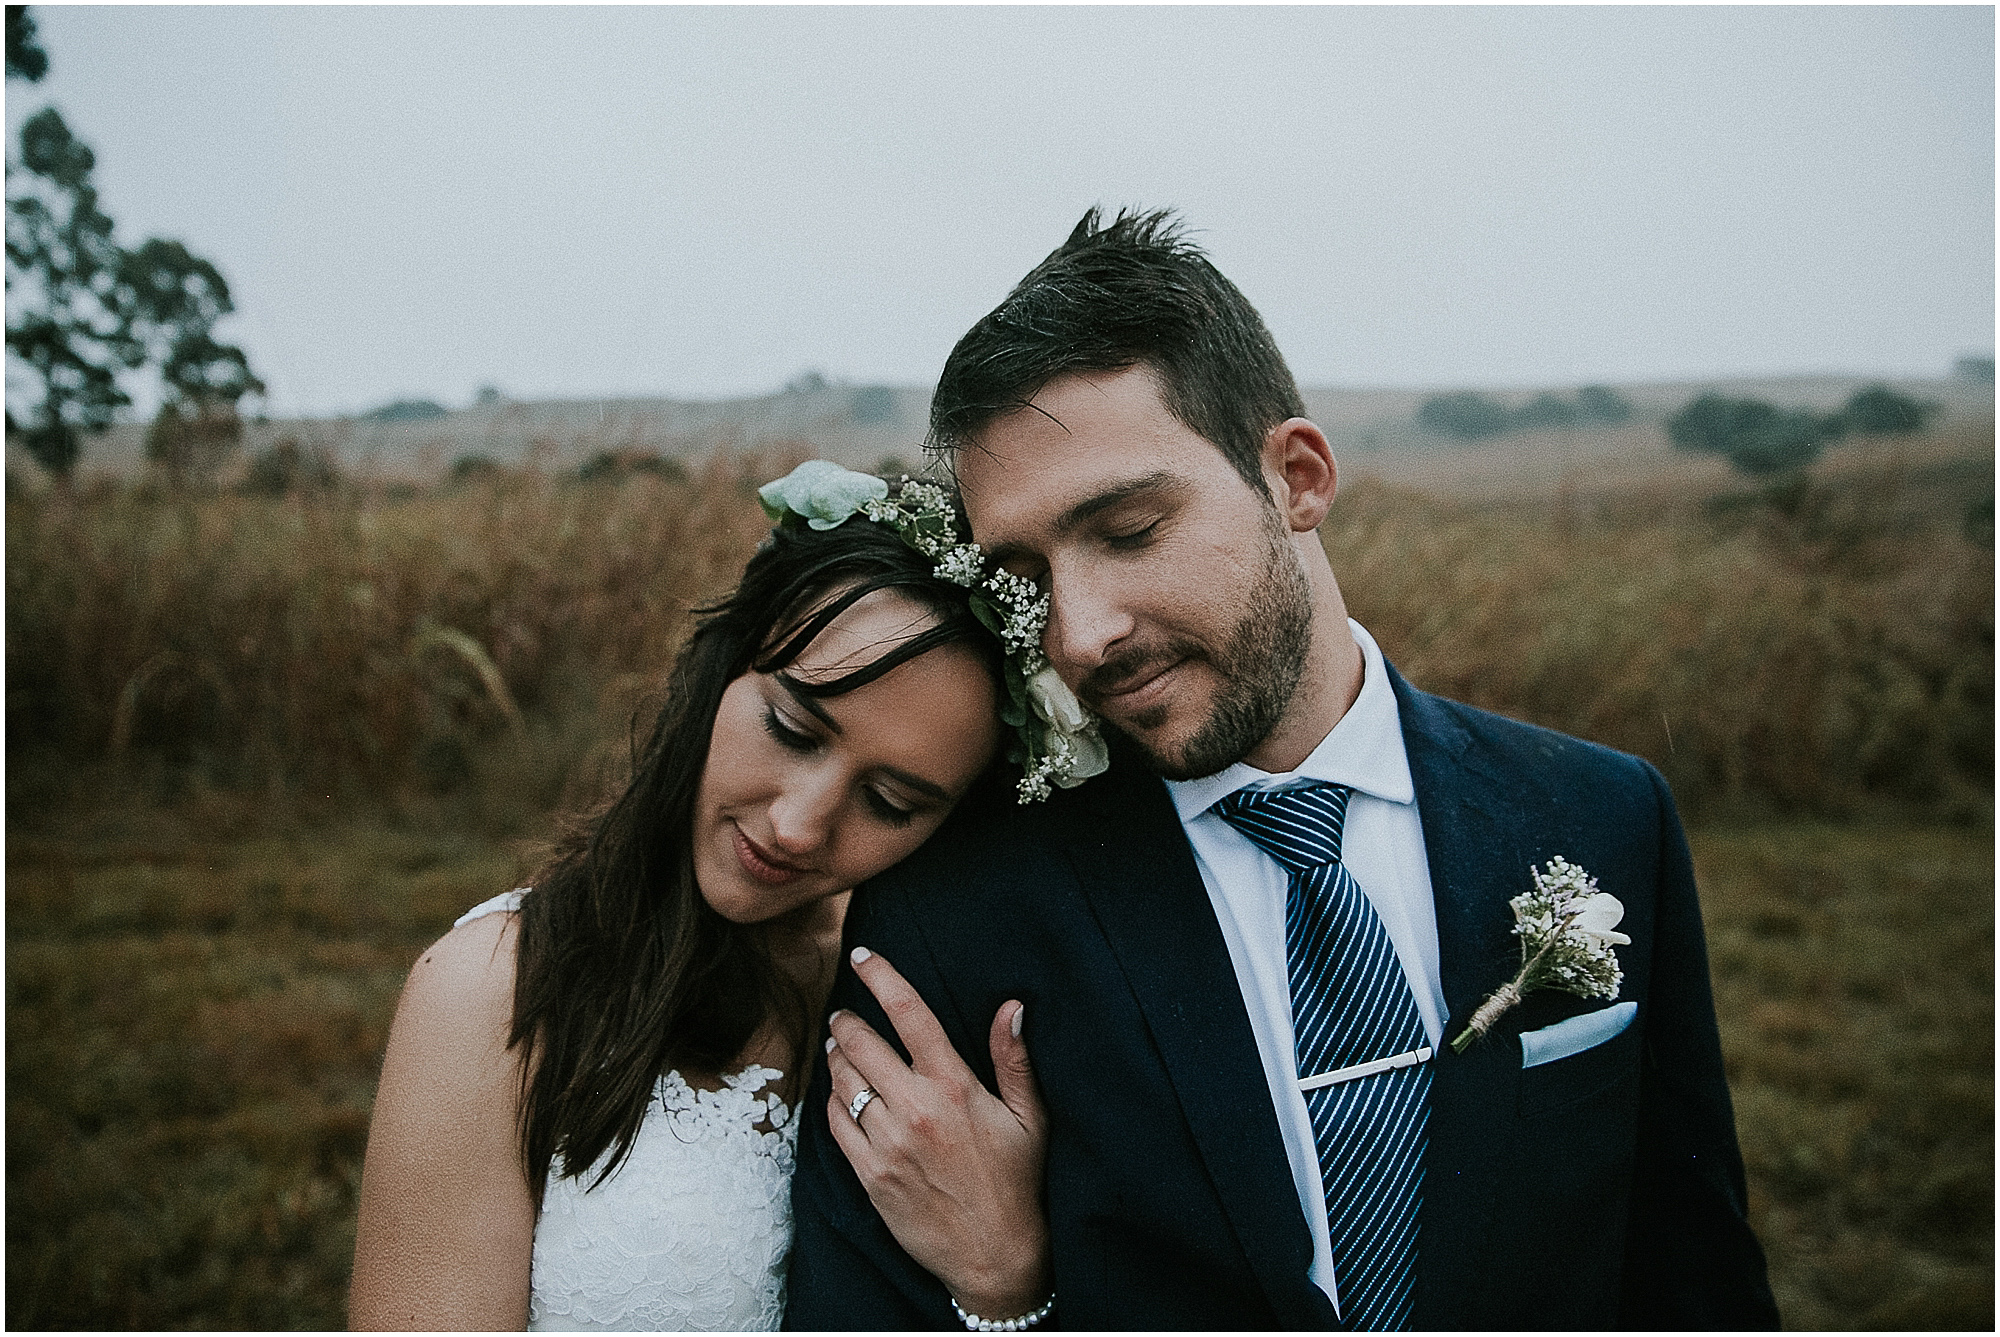 Outdoor-Forest-Destination-Wedding-Photographer-Maryke-Albertyn-Photography-Looks-Like-Film-Authentic-Alternative-Cape-Town-Pretoria-Silver-Sixpence-Dullstroom-bride-and-groom-couple-shoot